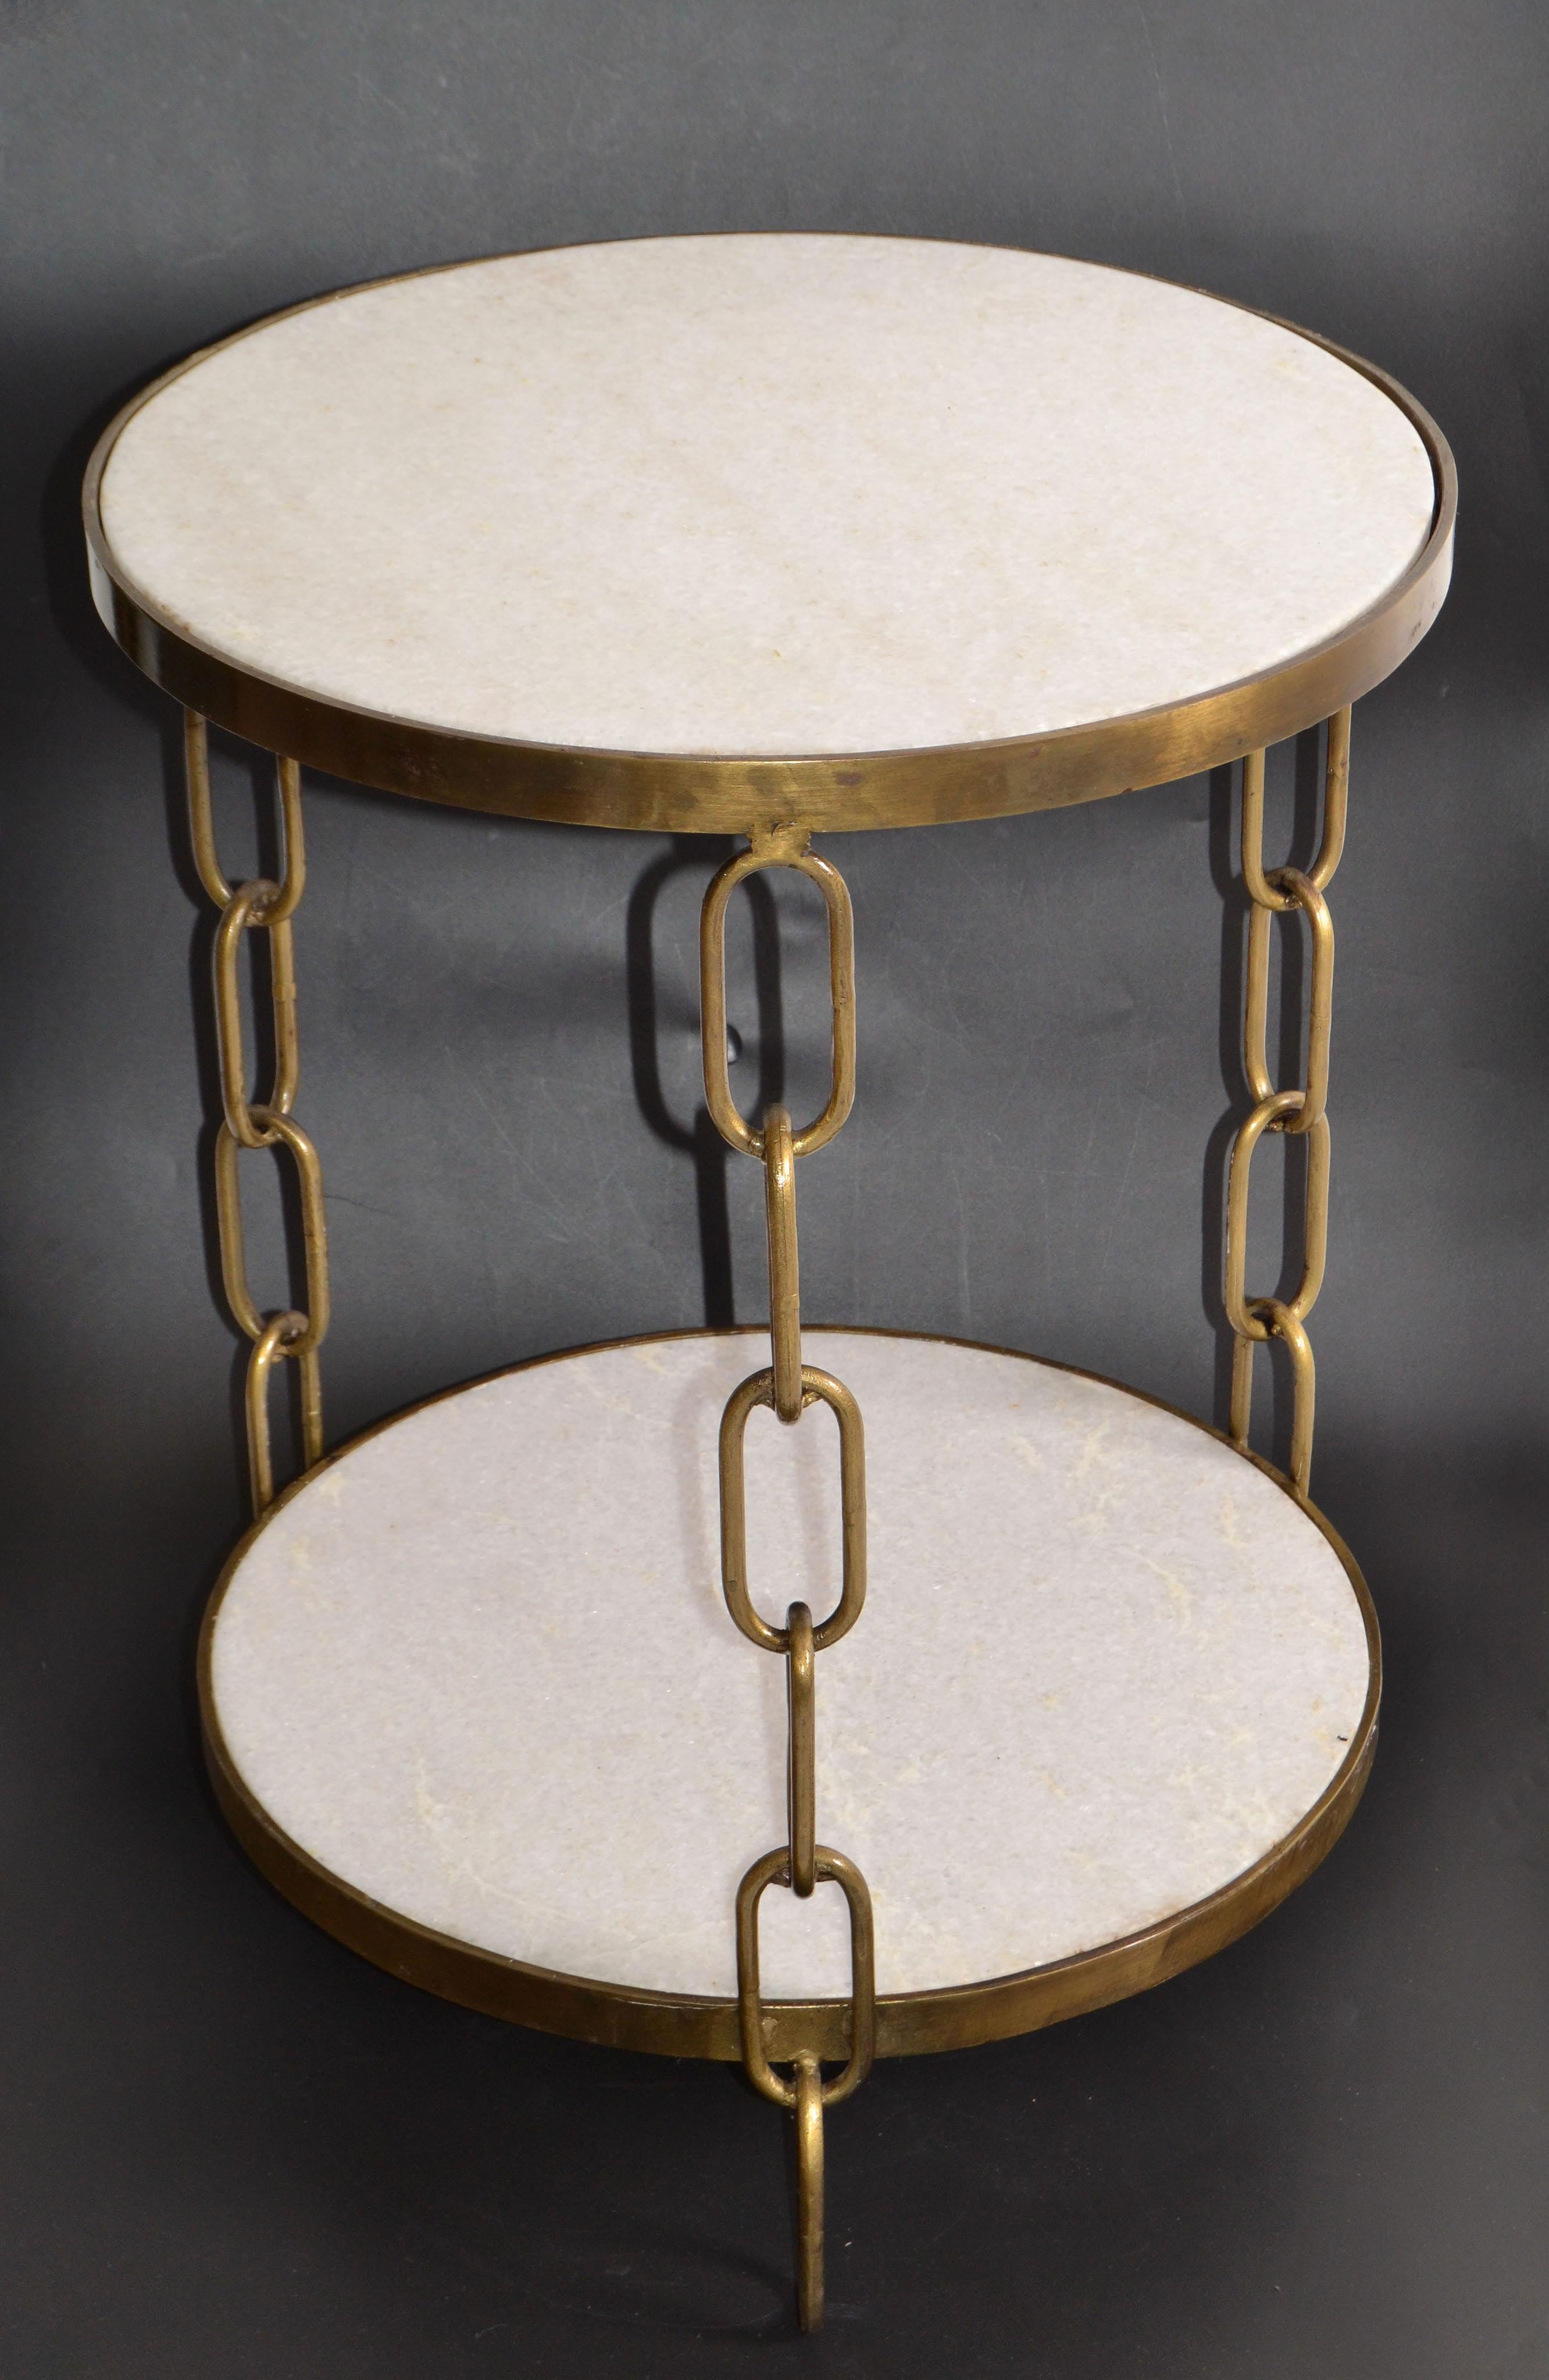 Mid-Century Modern bronze & white granite round two tier side table chain-link legs.
Space in between measures: 17.5 inches.